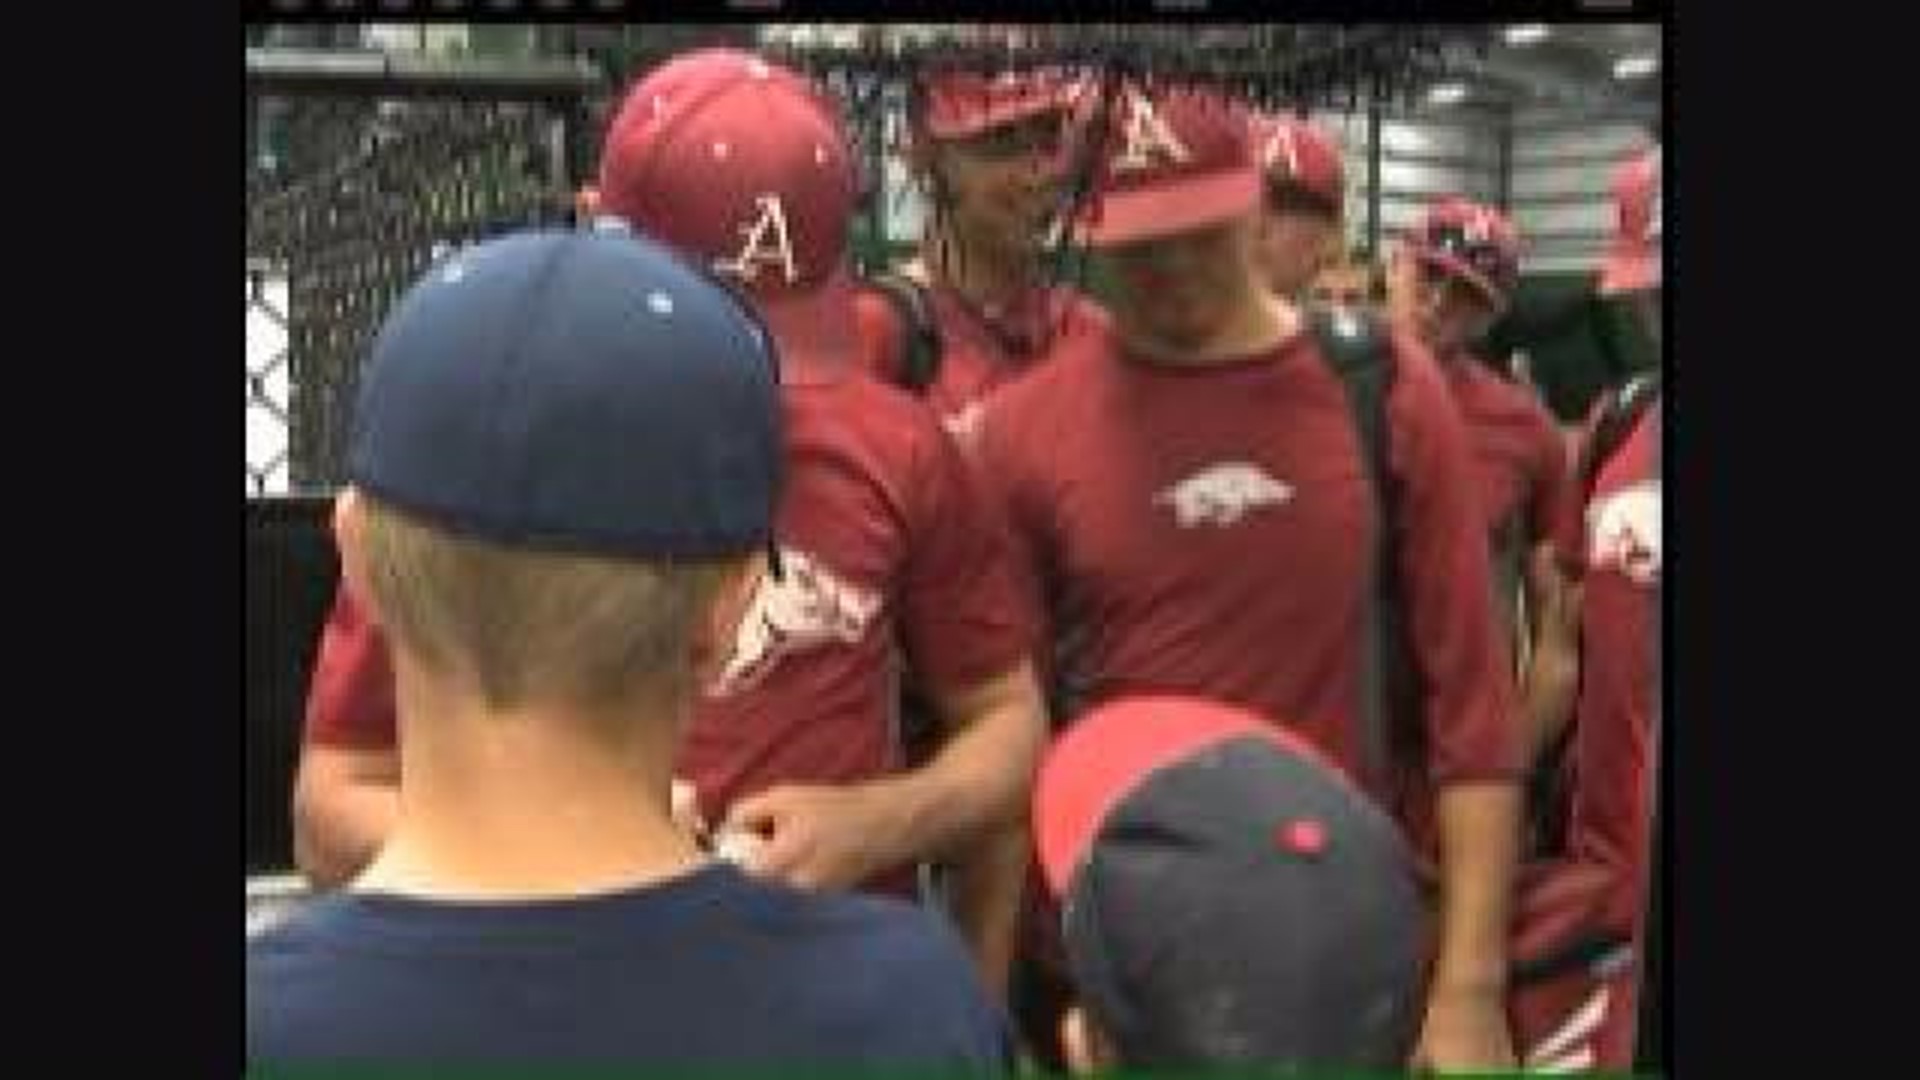 Hogs Get Star Treatment in Omaha